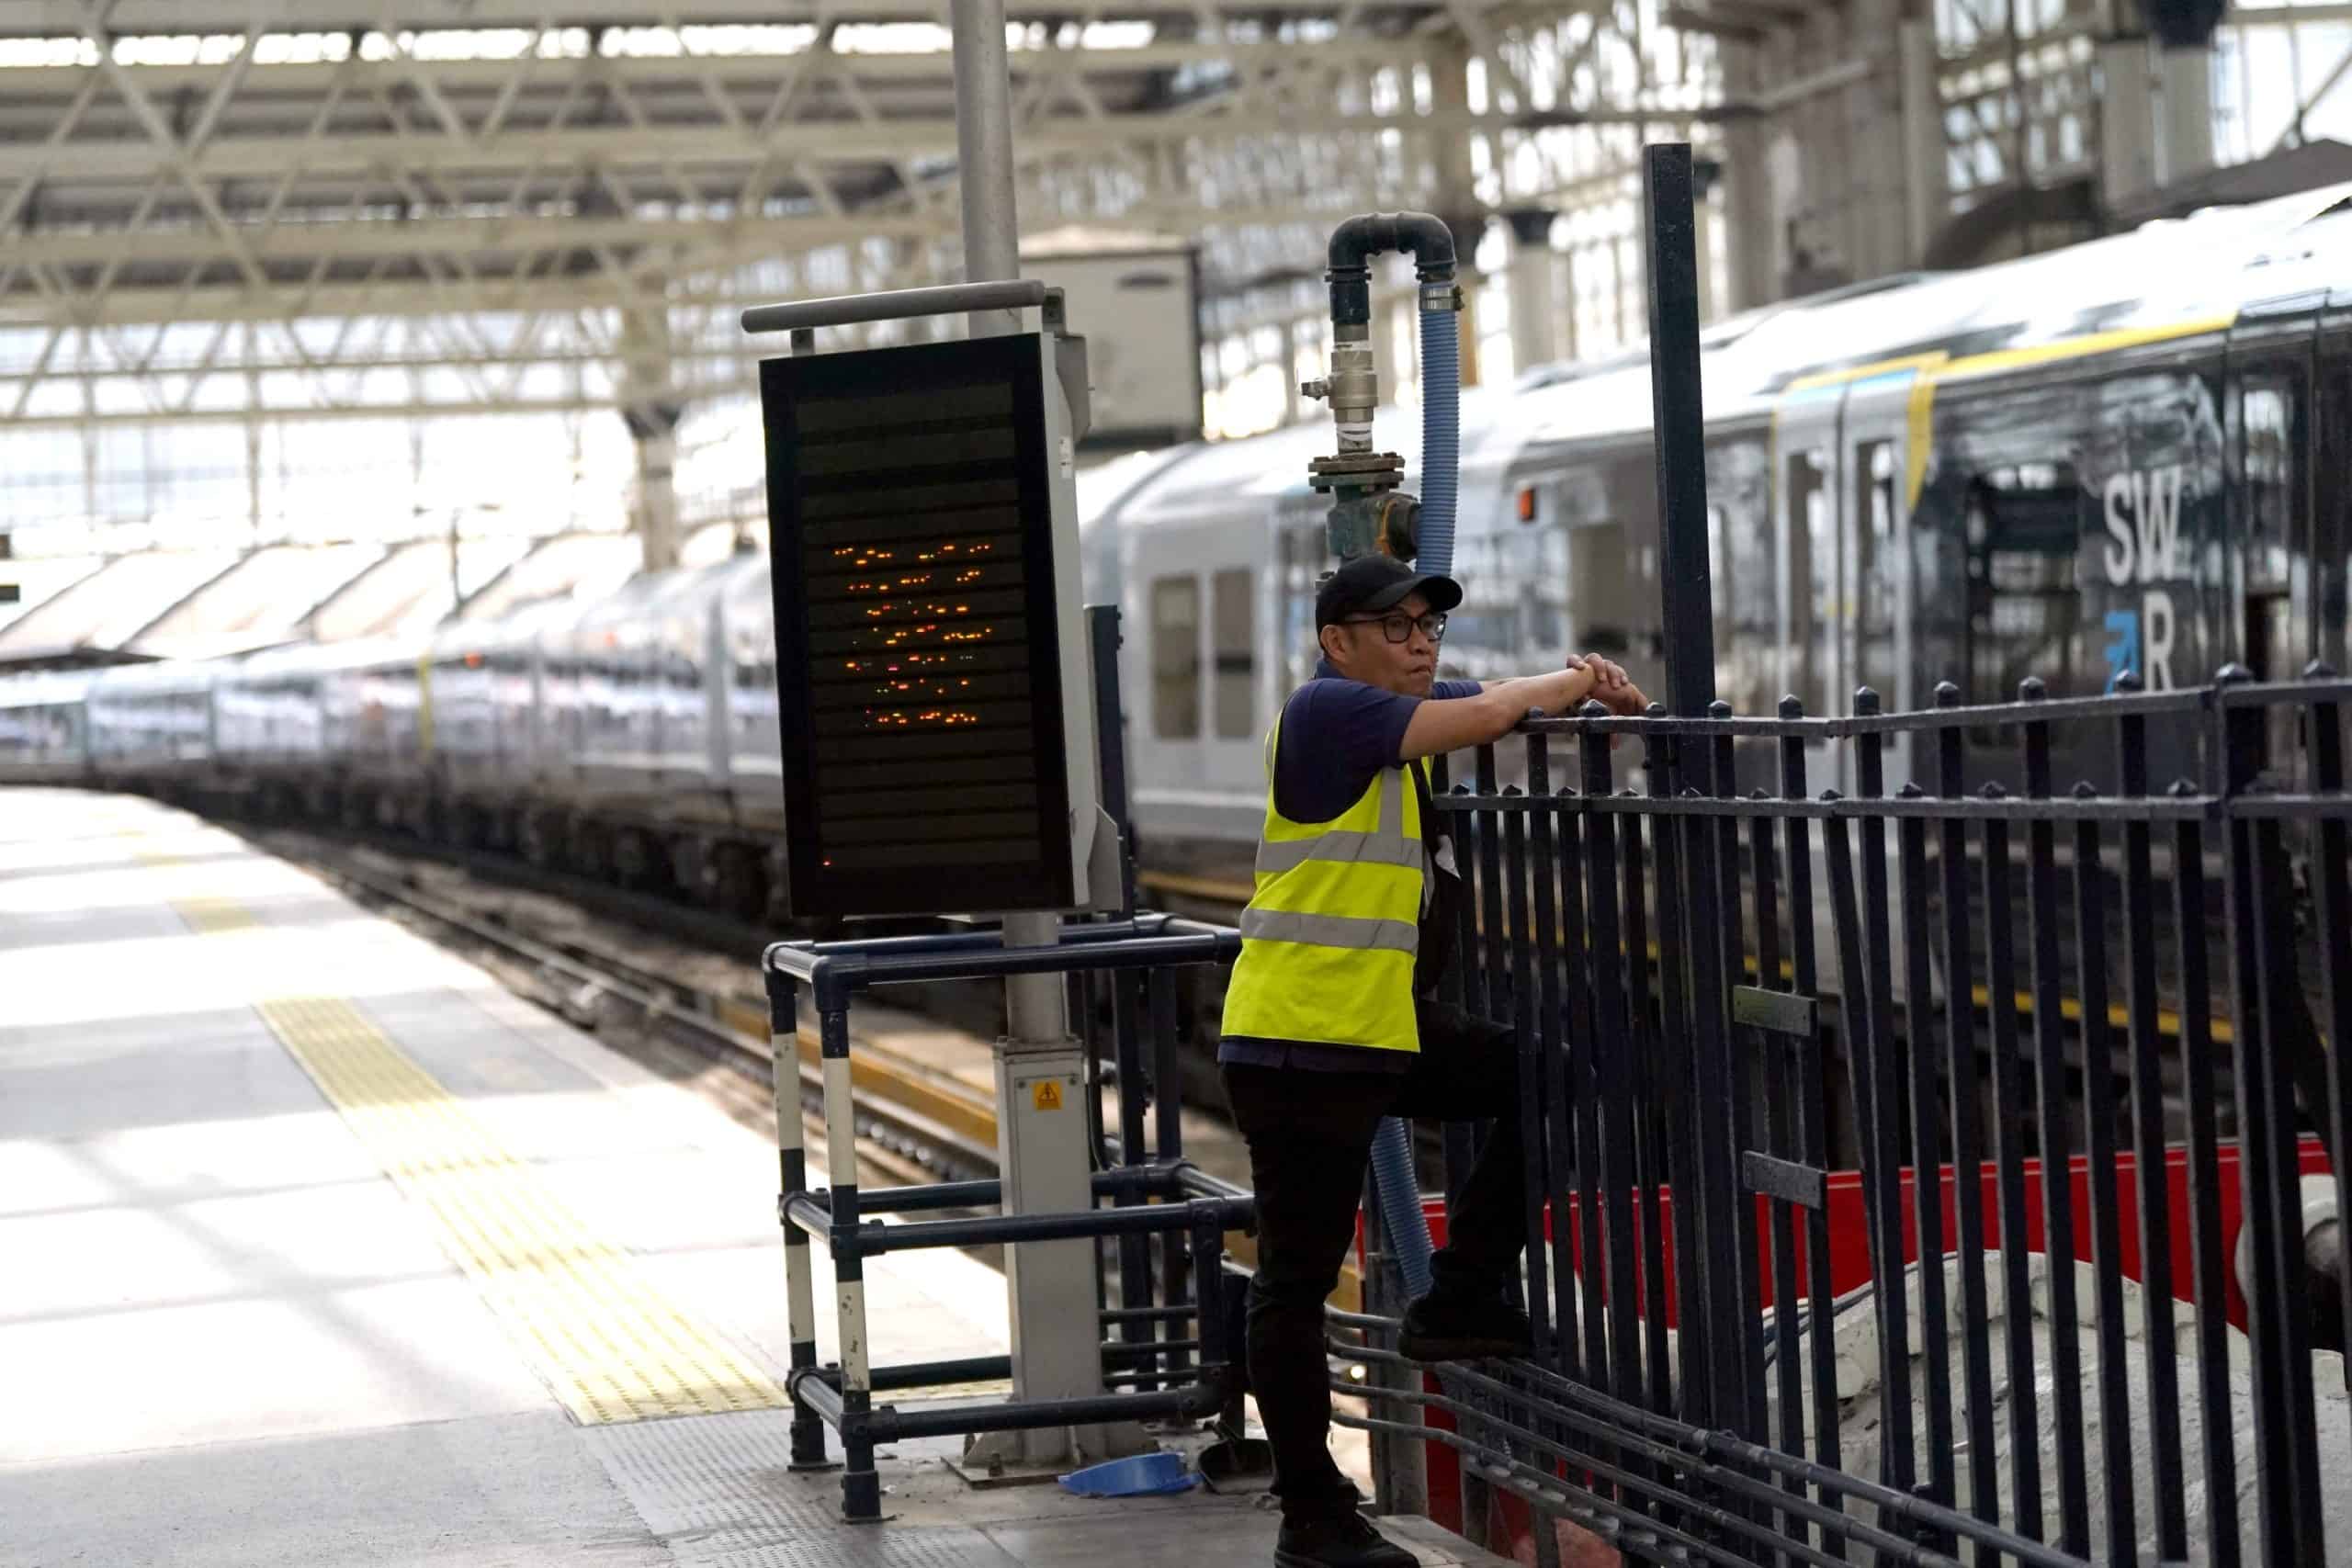 ‘Thanks Britain’: Viral video exposes extent of UK rail privatisation